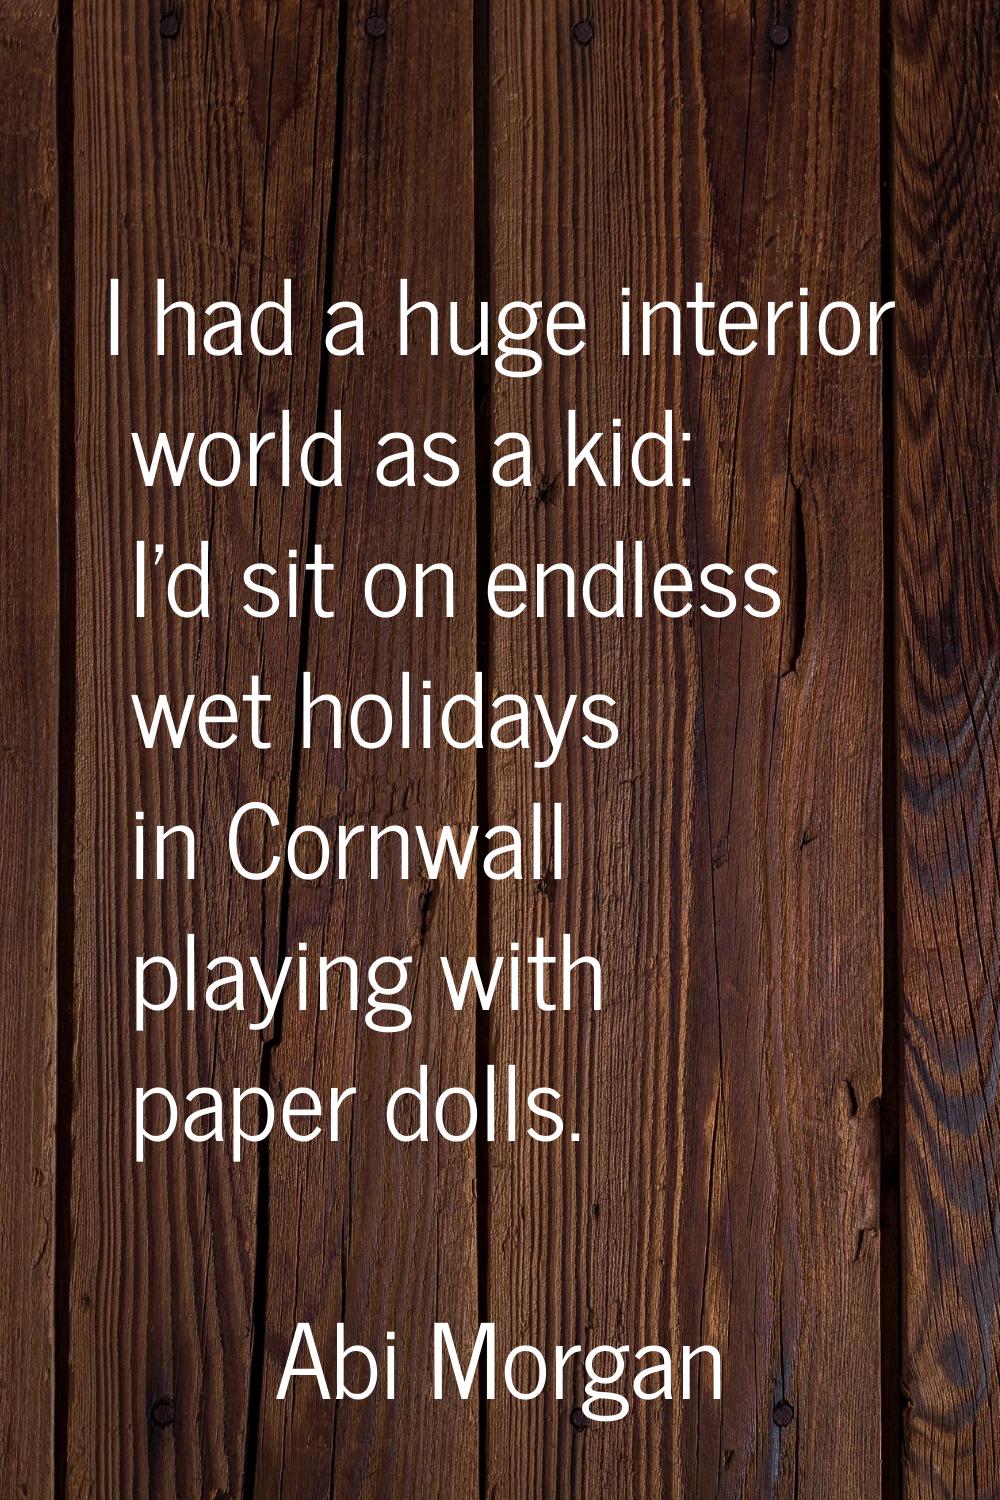 I had a huge interior world as a kid: I'd sit on endless wet holidays in Cornwall playing with pape